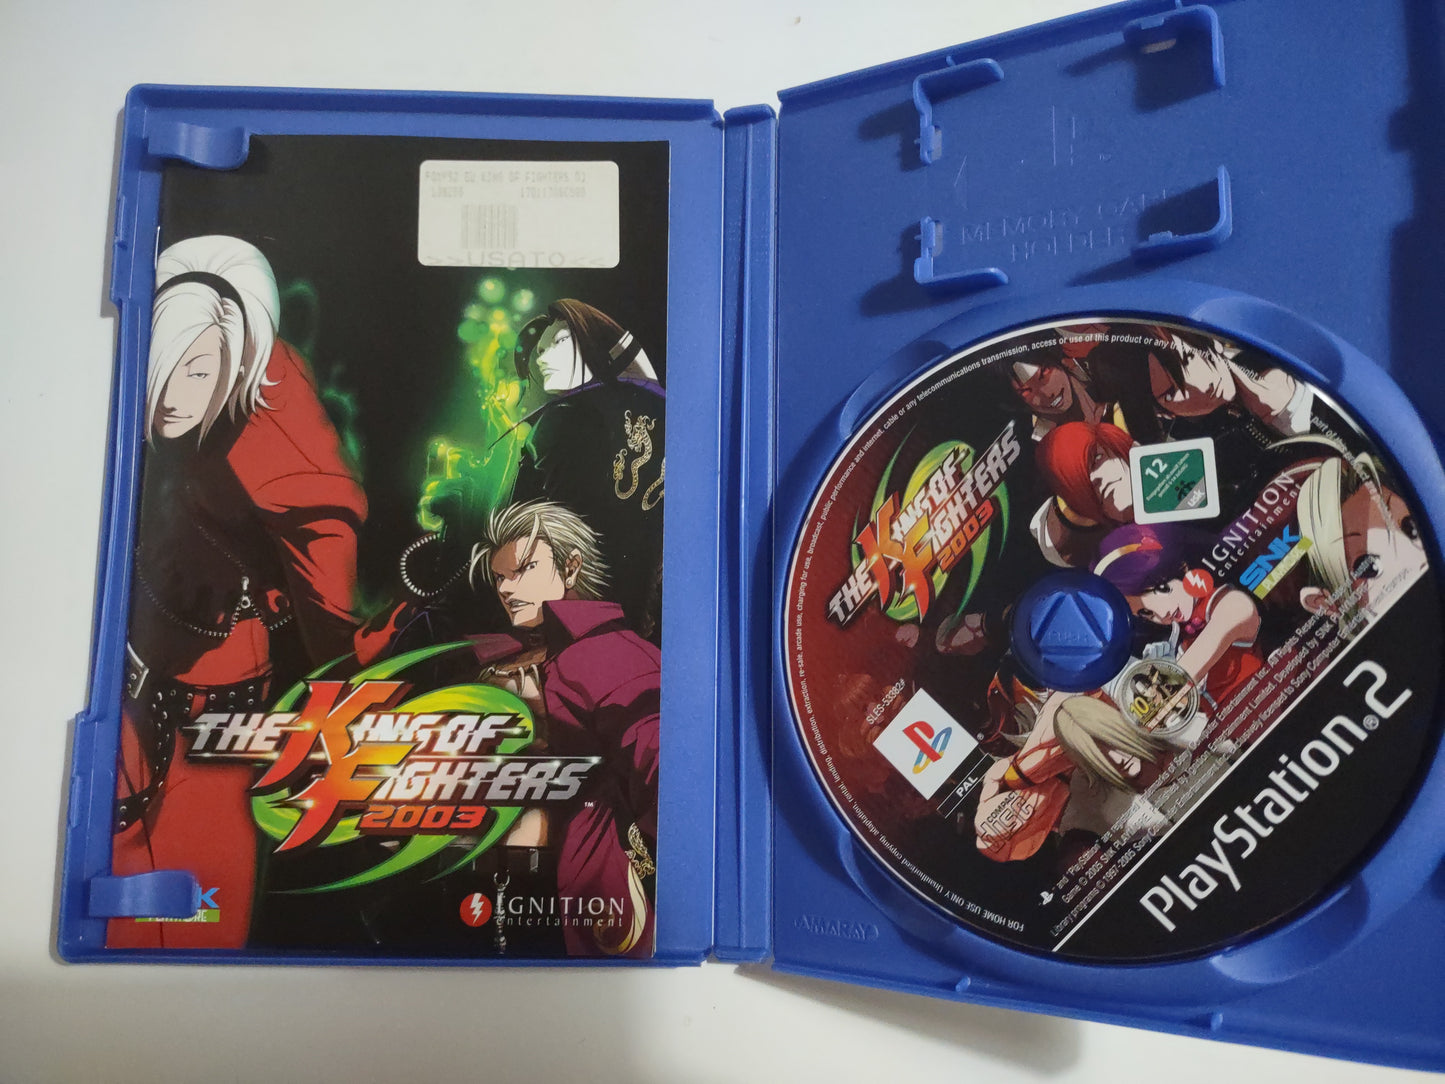 Gioco PlayStation 2 Ps2 king of fighters 2003